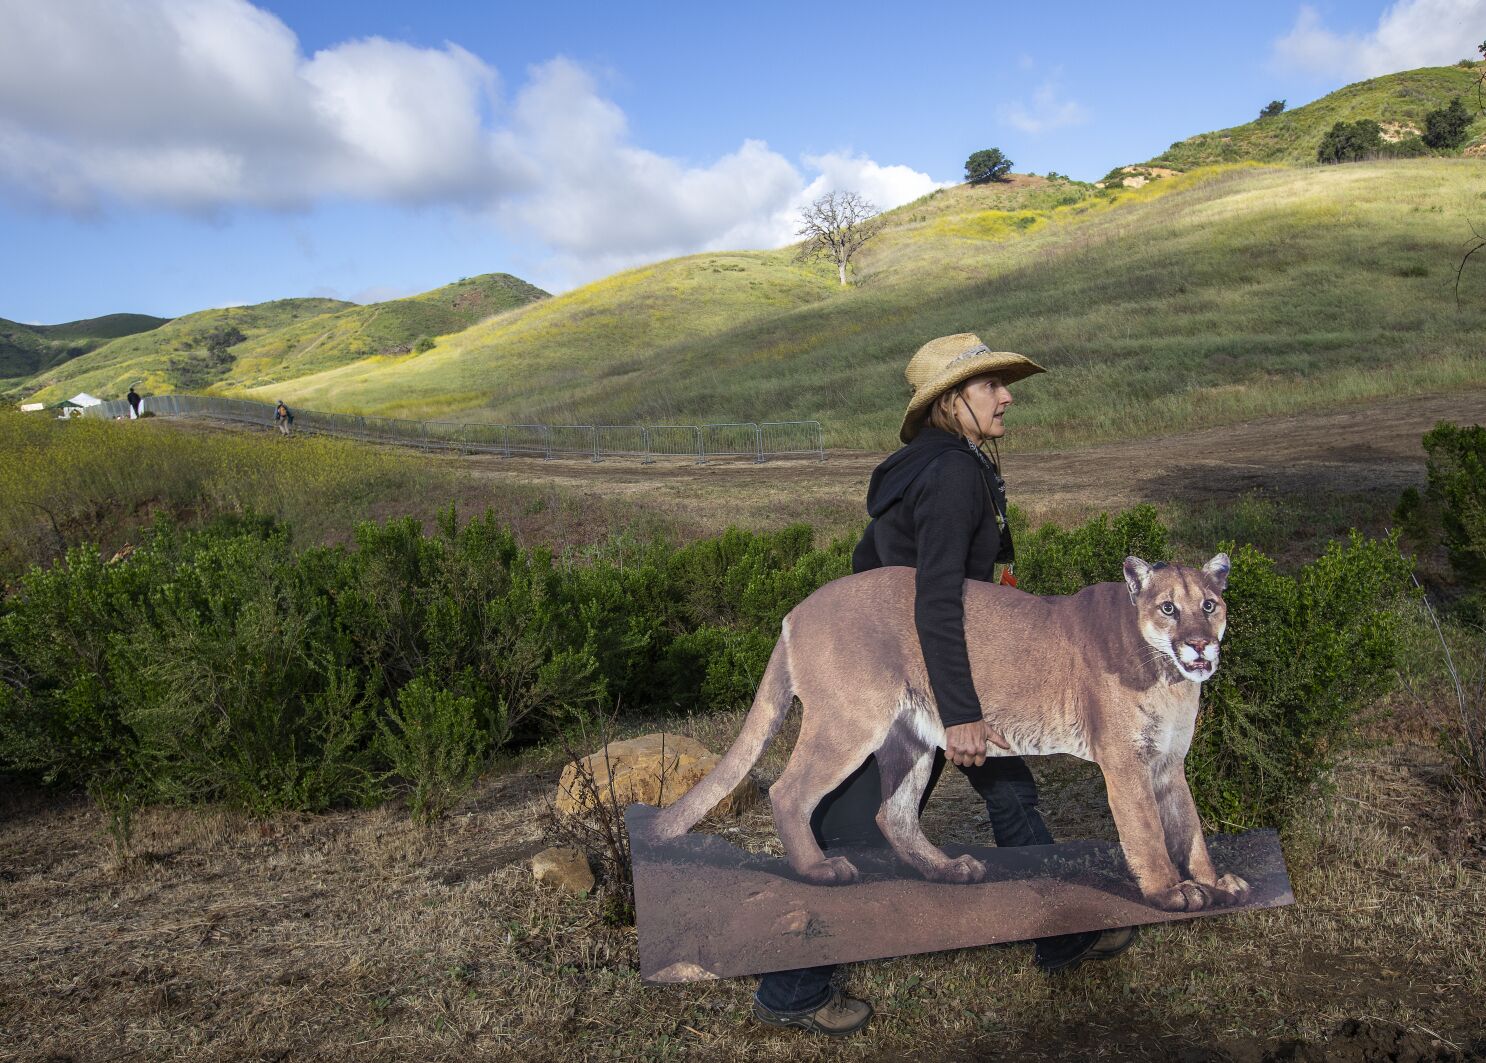 A cougar crossing rises over a deadly . freeway - Los Angeles Times